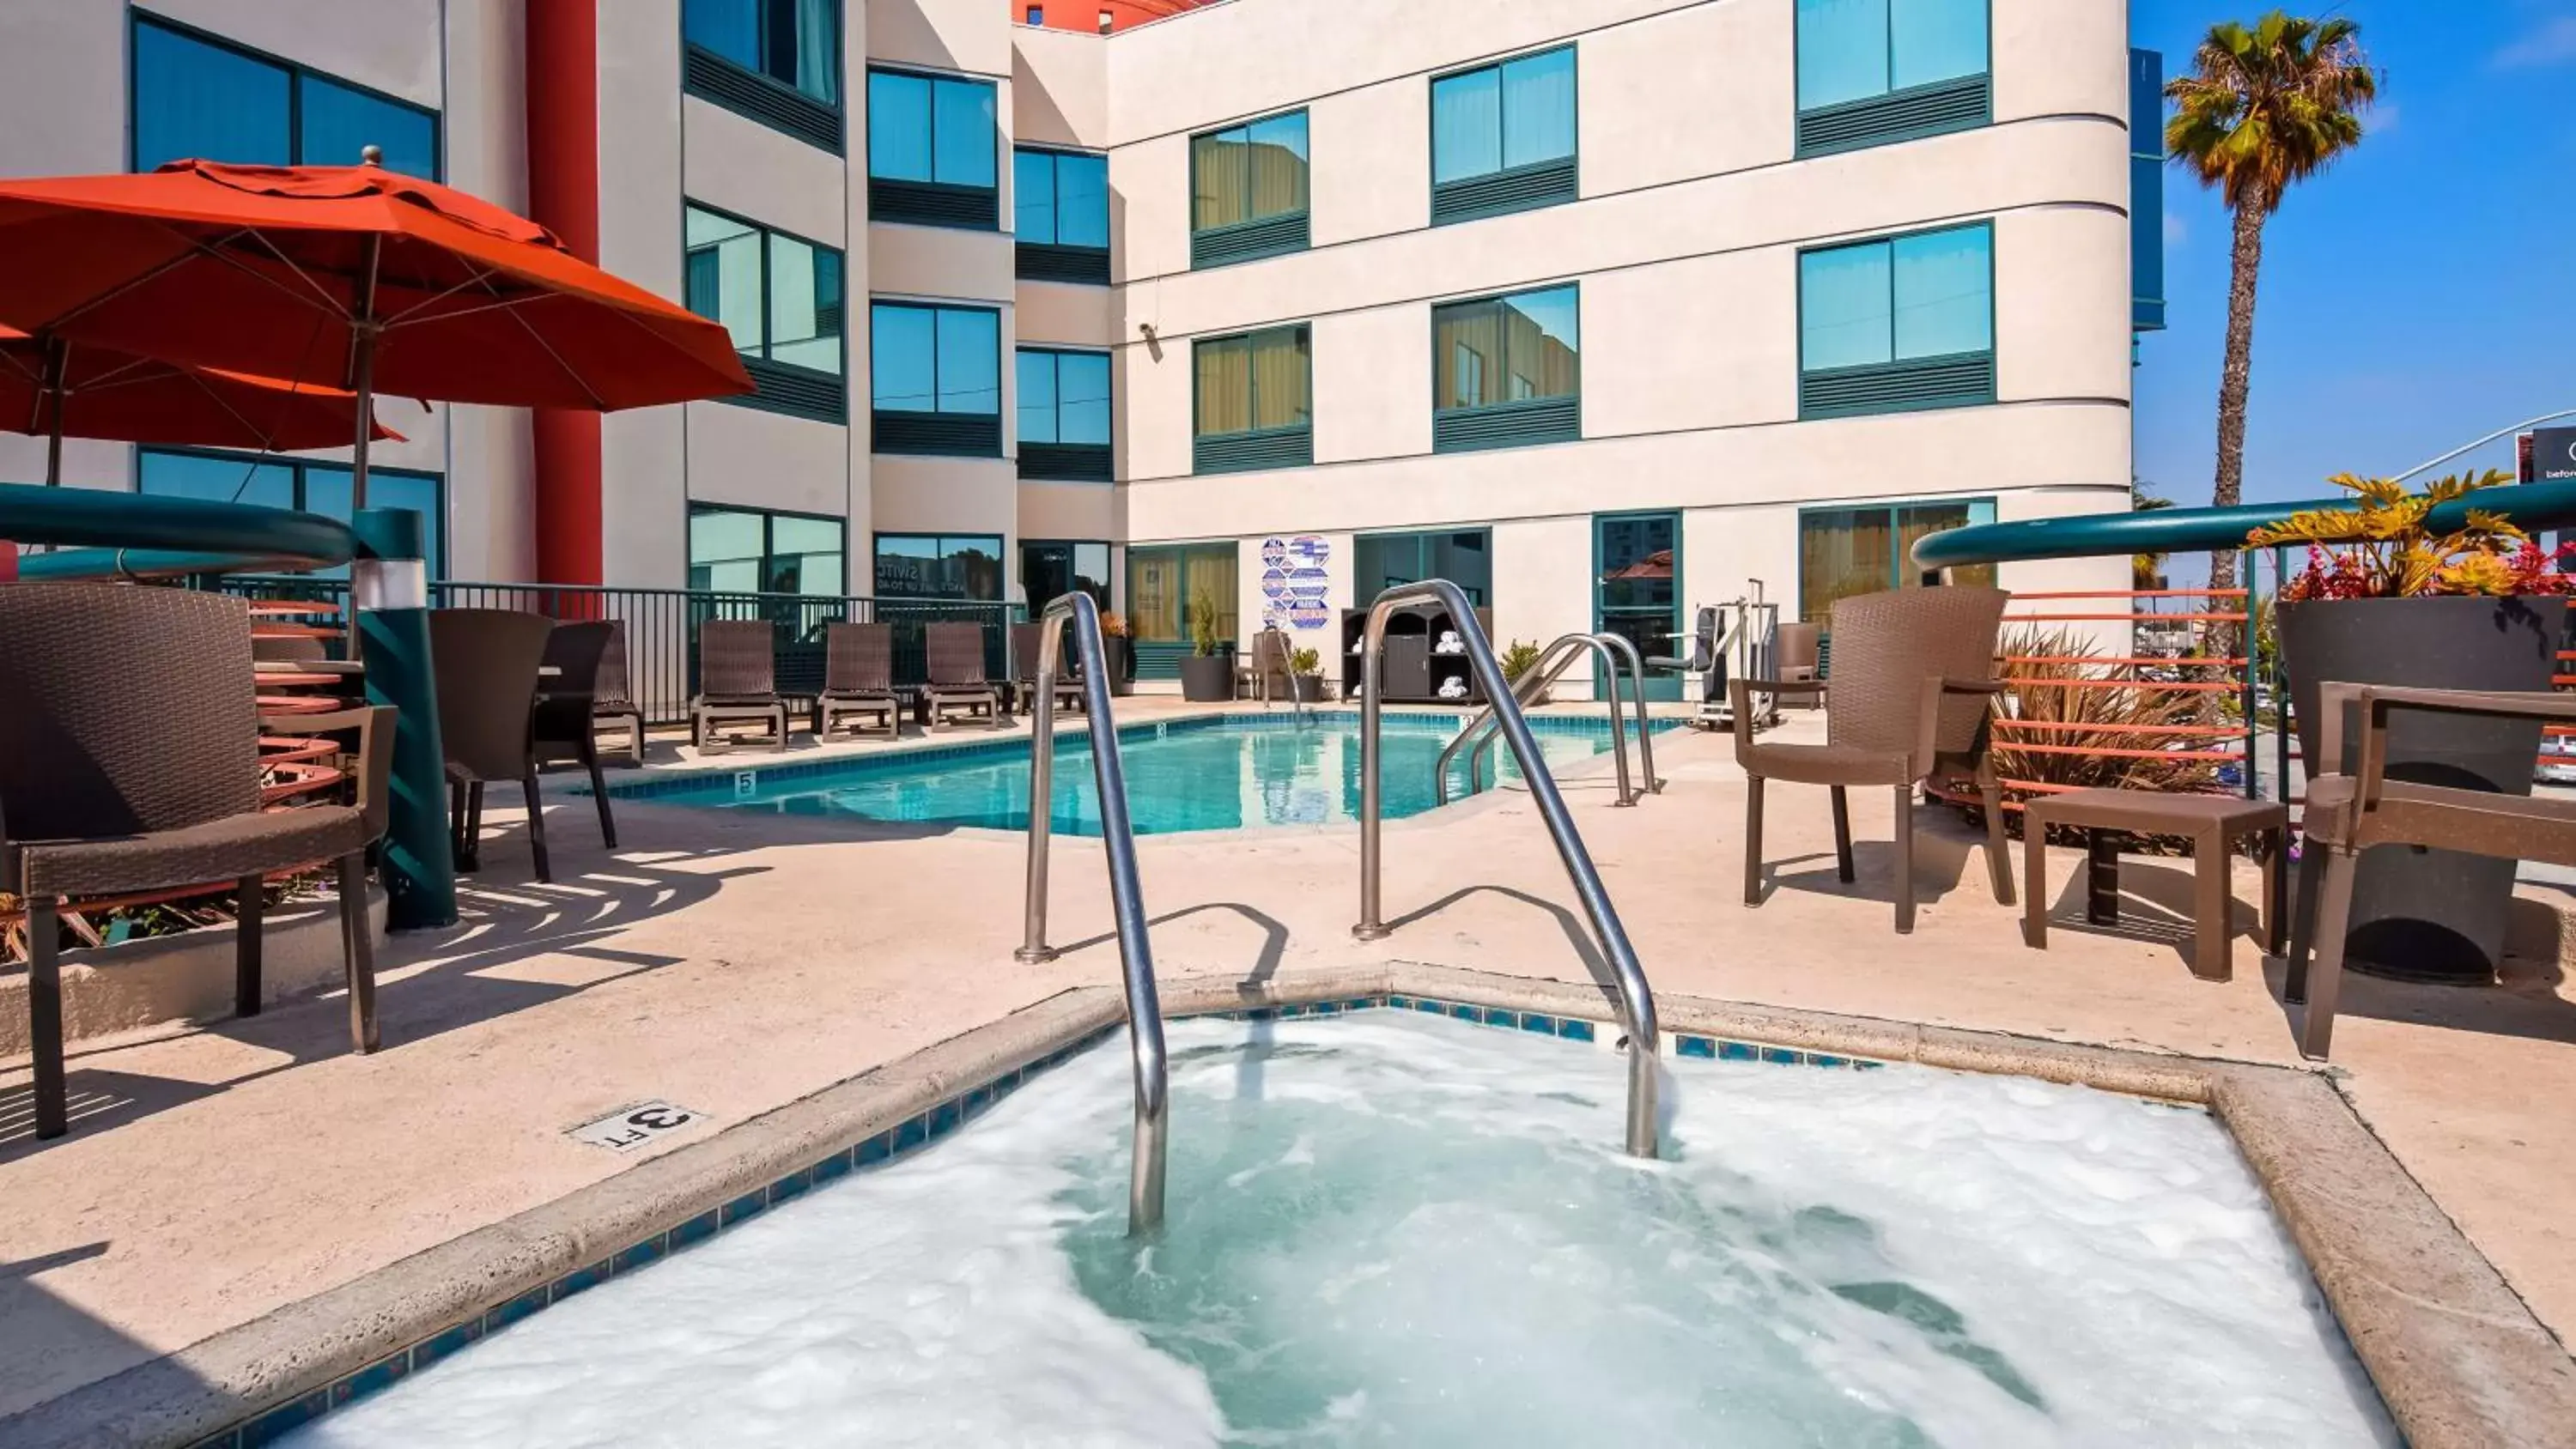 On site, Swimming Pool in Best Western Plus Suites Hotel - Los Angeles LAX Airport